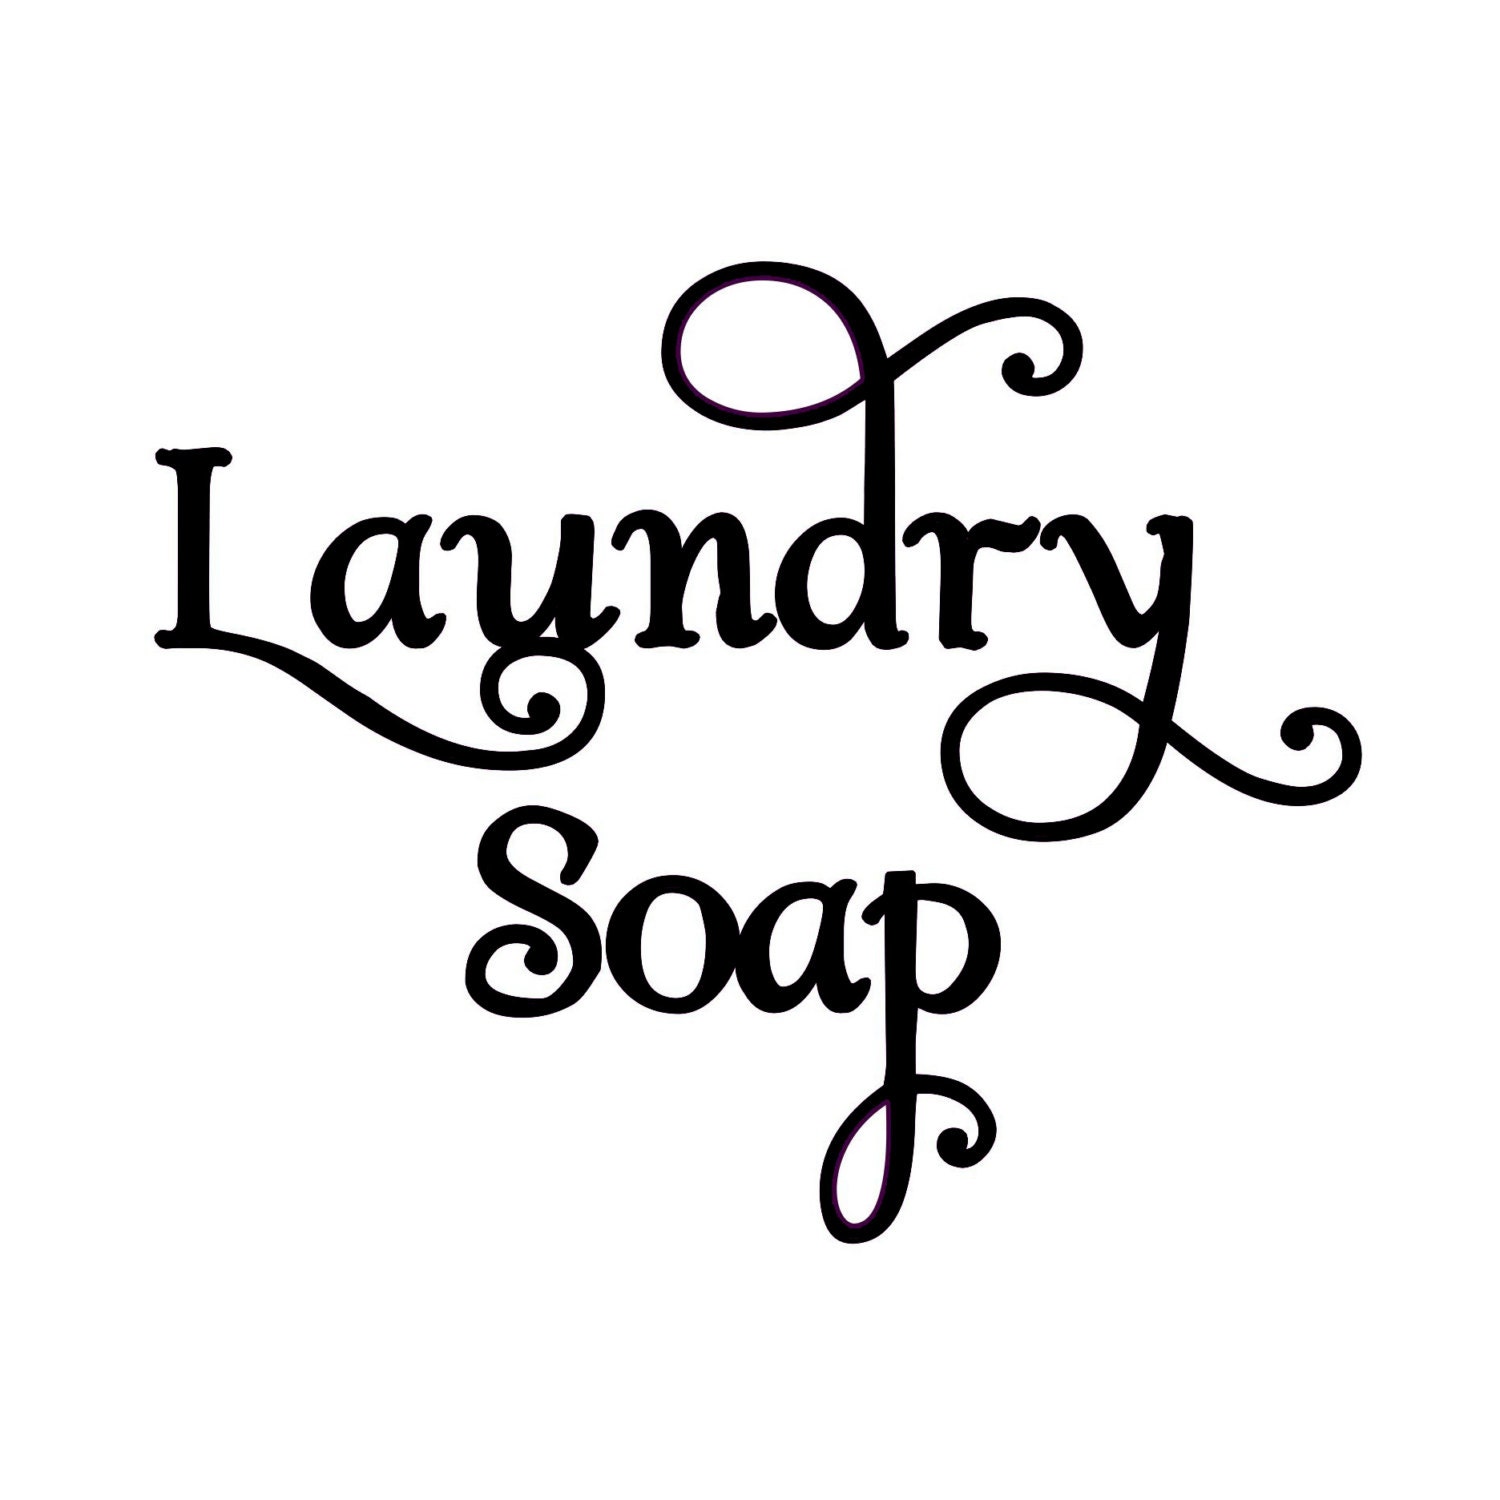 laundry-soap-label-vinyl-decal-sticker-home-clothes-washer-etsy